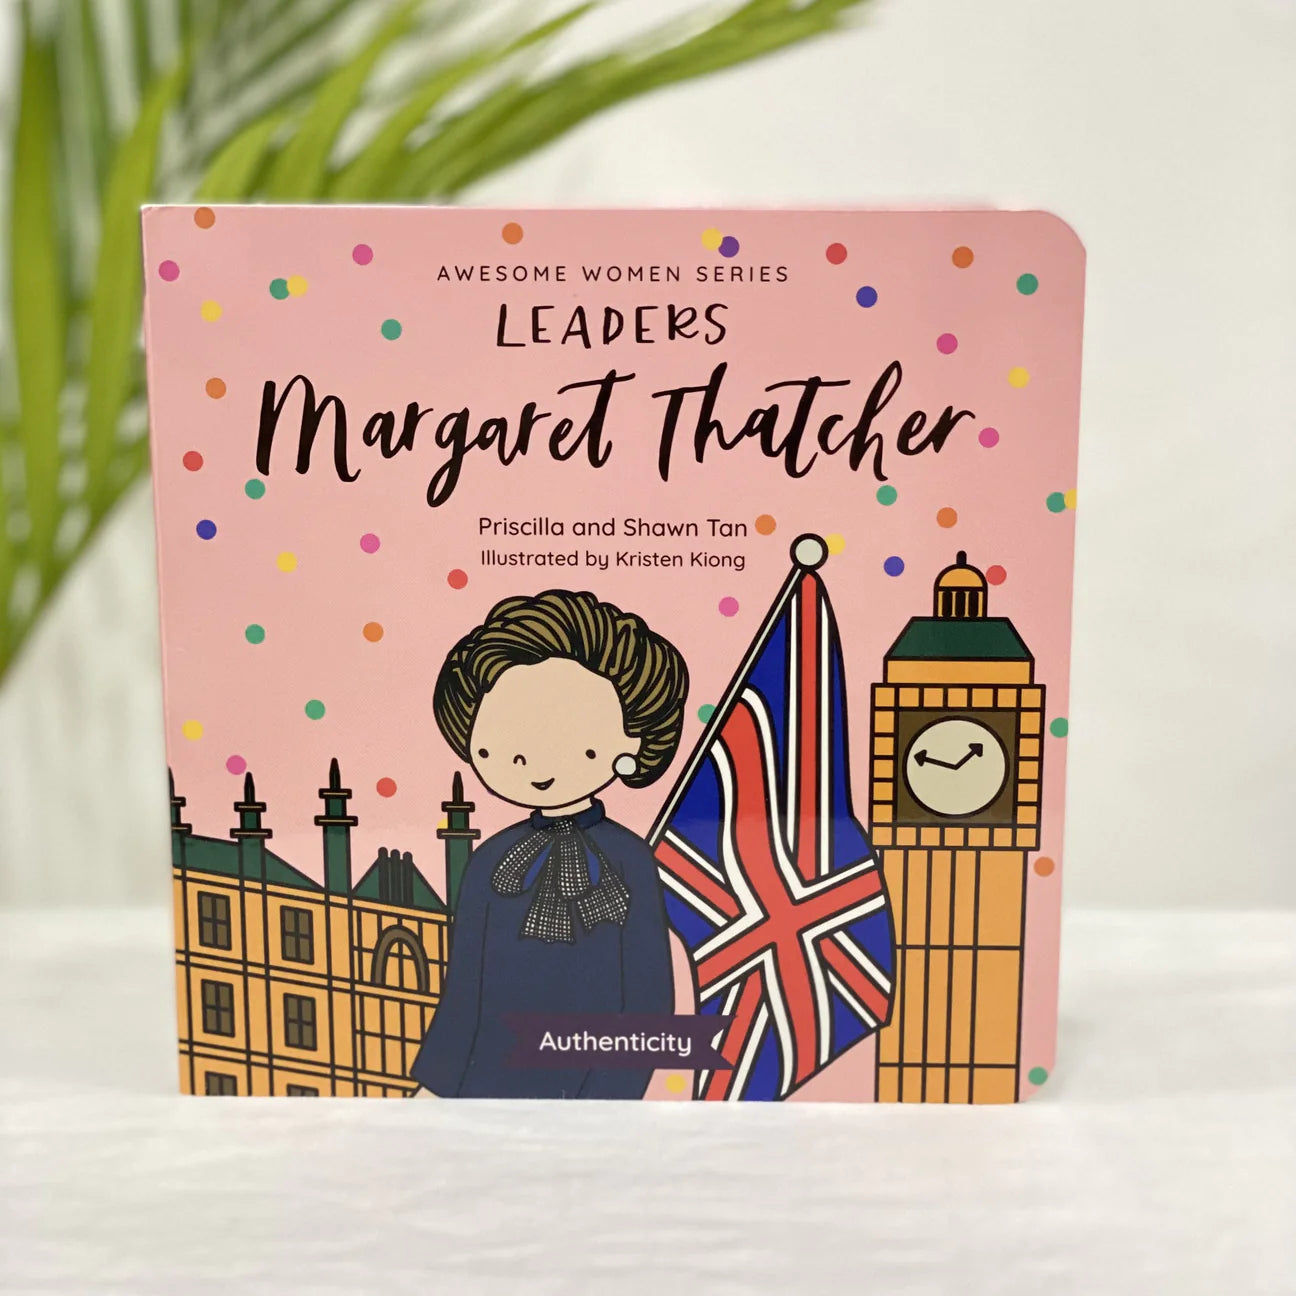 Awesome Women Series Leaders | Margaret Thatcher